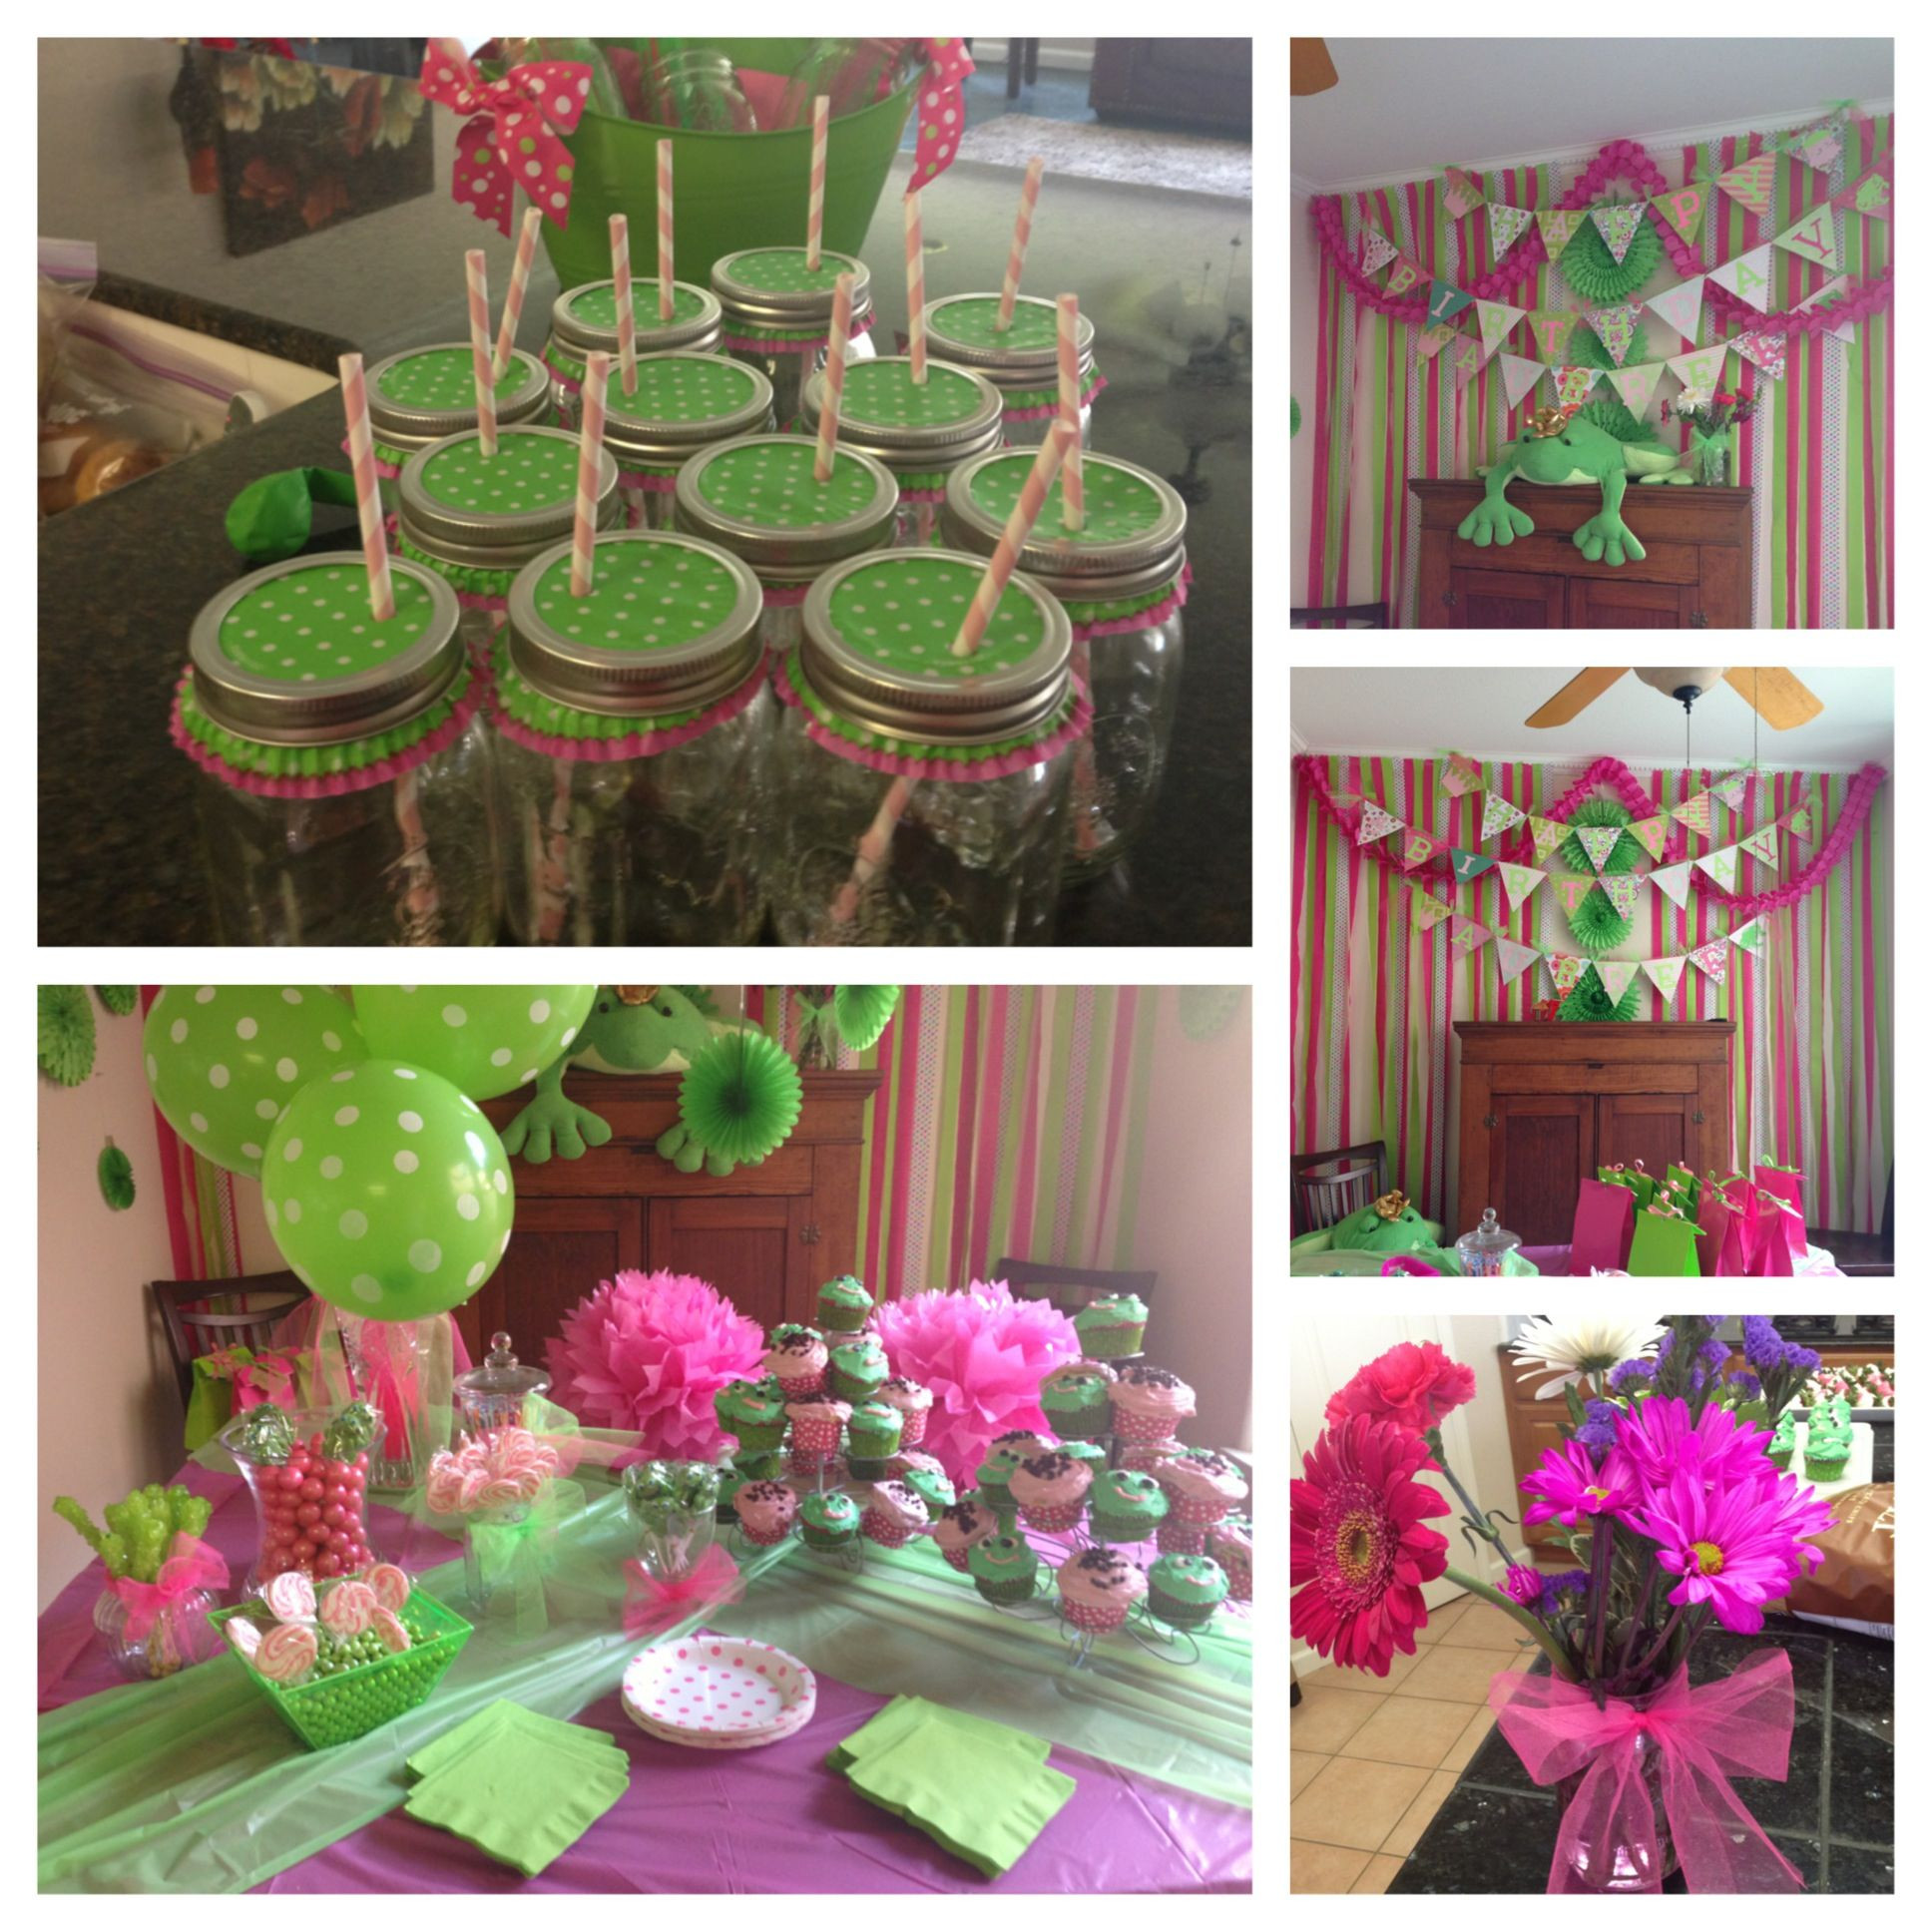 11 Year Old Girl Birthday Party
 11 Year Old Birthday Party Ideas